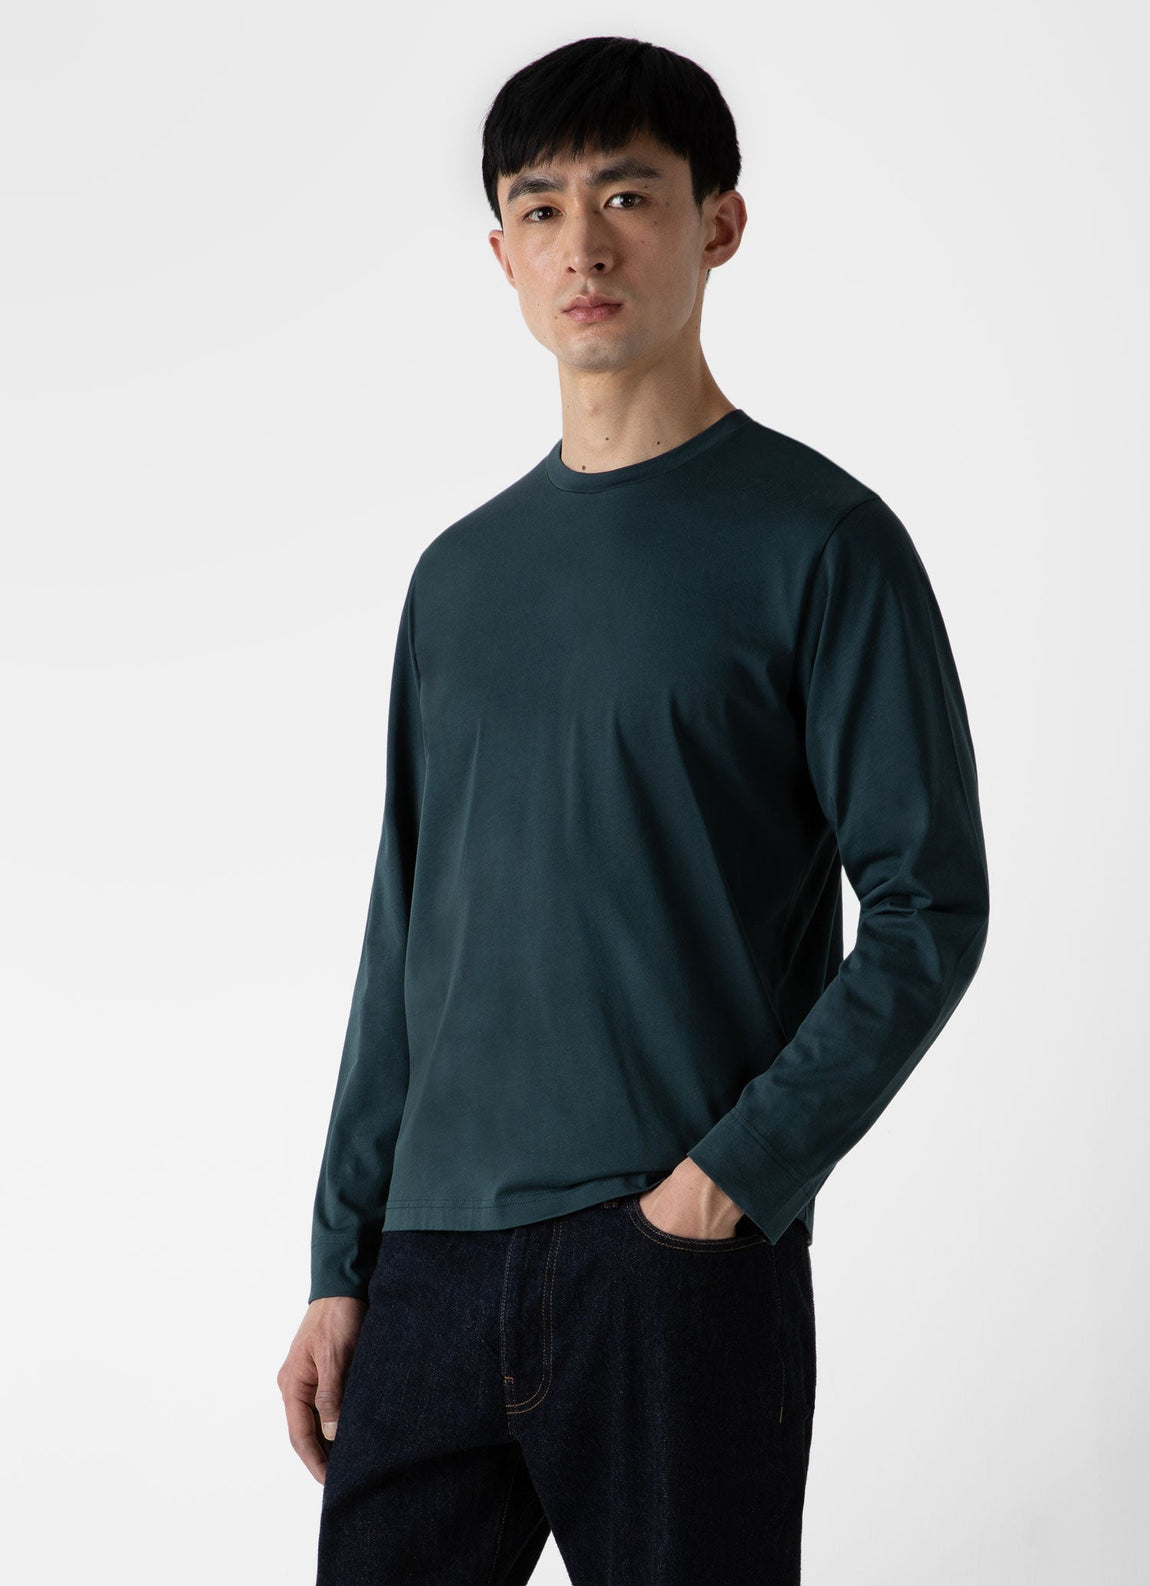 Men's Long Sleeve Riviera Midweight T-shirt in Peacock